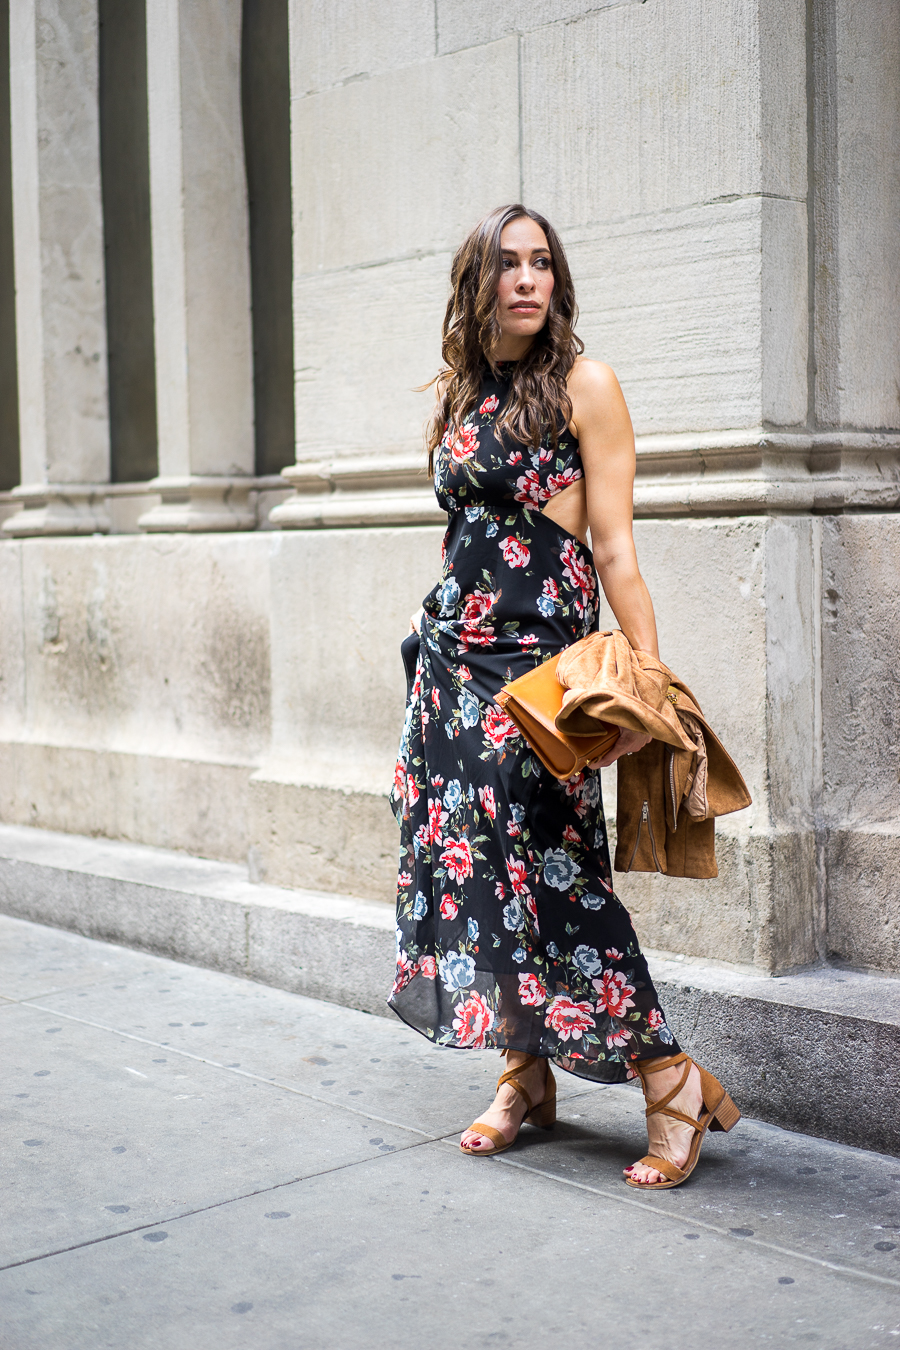 a-glam-lifestyle-blogger, zara-floral-maxi-dress, gigi-new-york-leather-clutch, tan-suede-jacket, steve-madden-lace-up-sandals, new-york-fashion-week-outfit